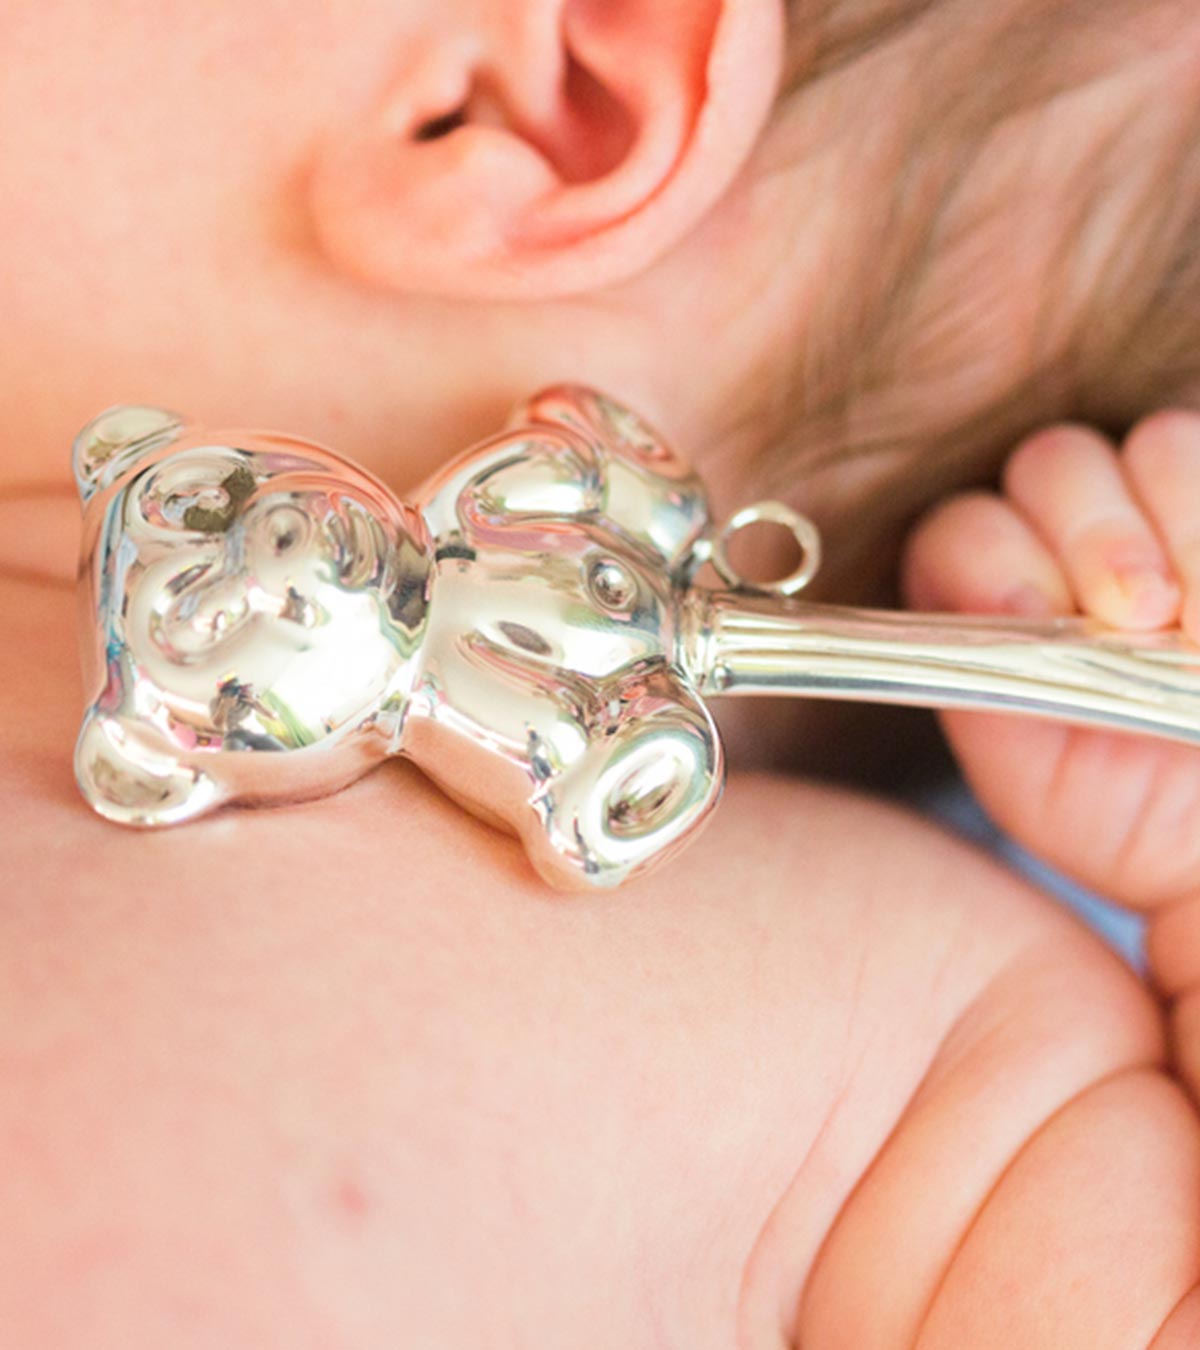 Silver Utensils For Baby: Are they Safe, Benefits And Tips To Use Them